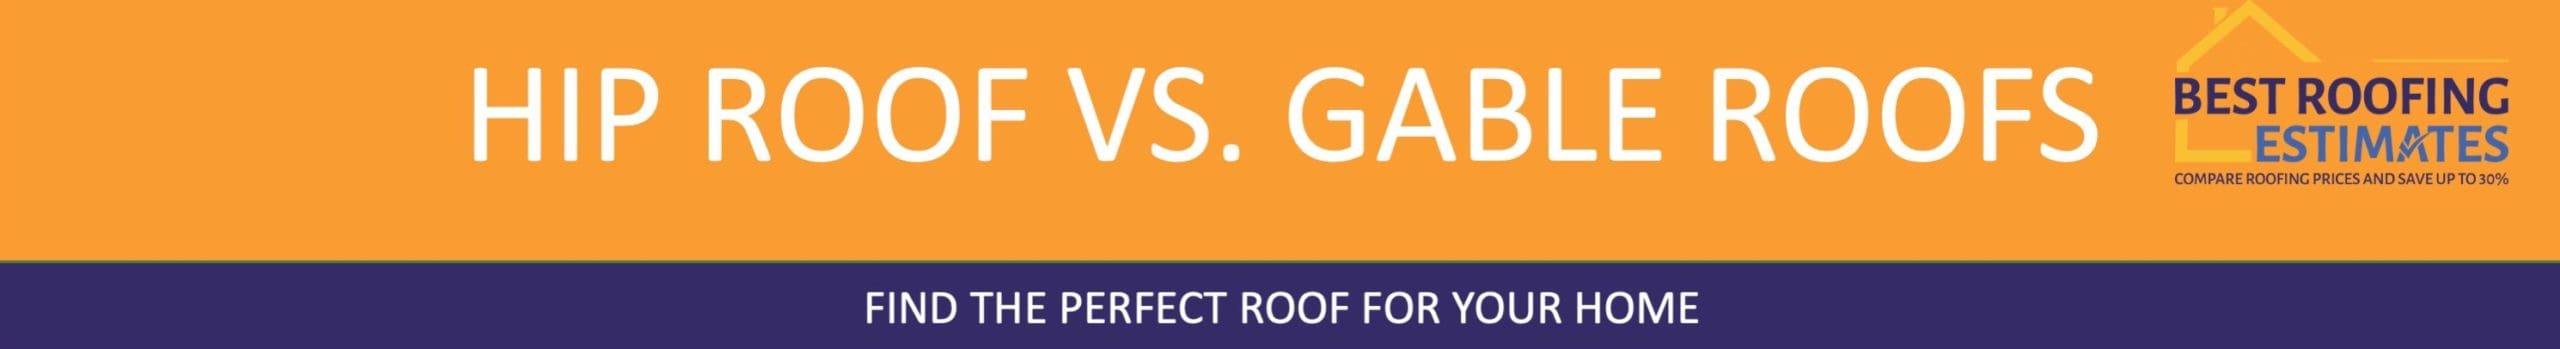 Gable Roof VS Hip Roof